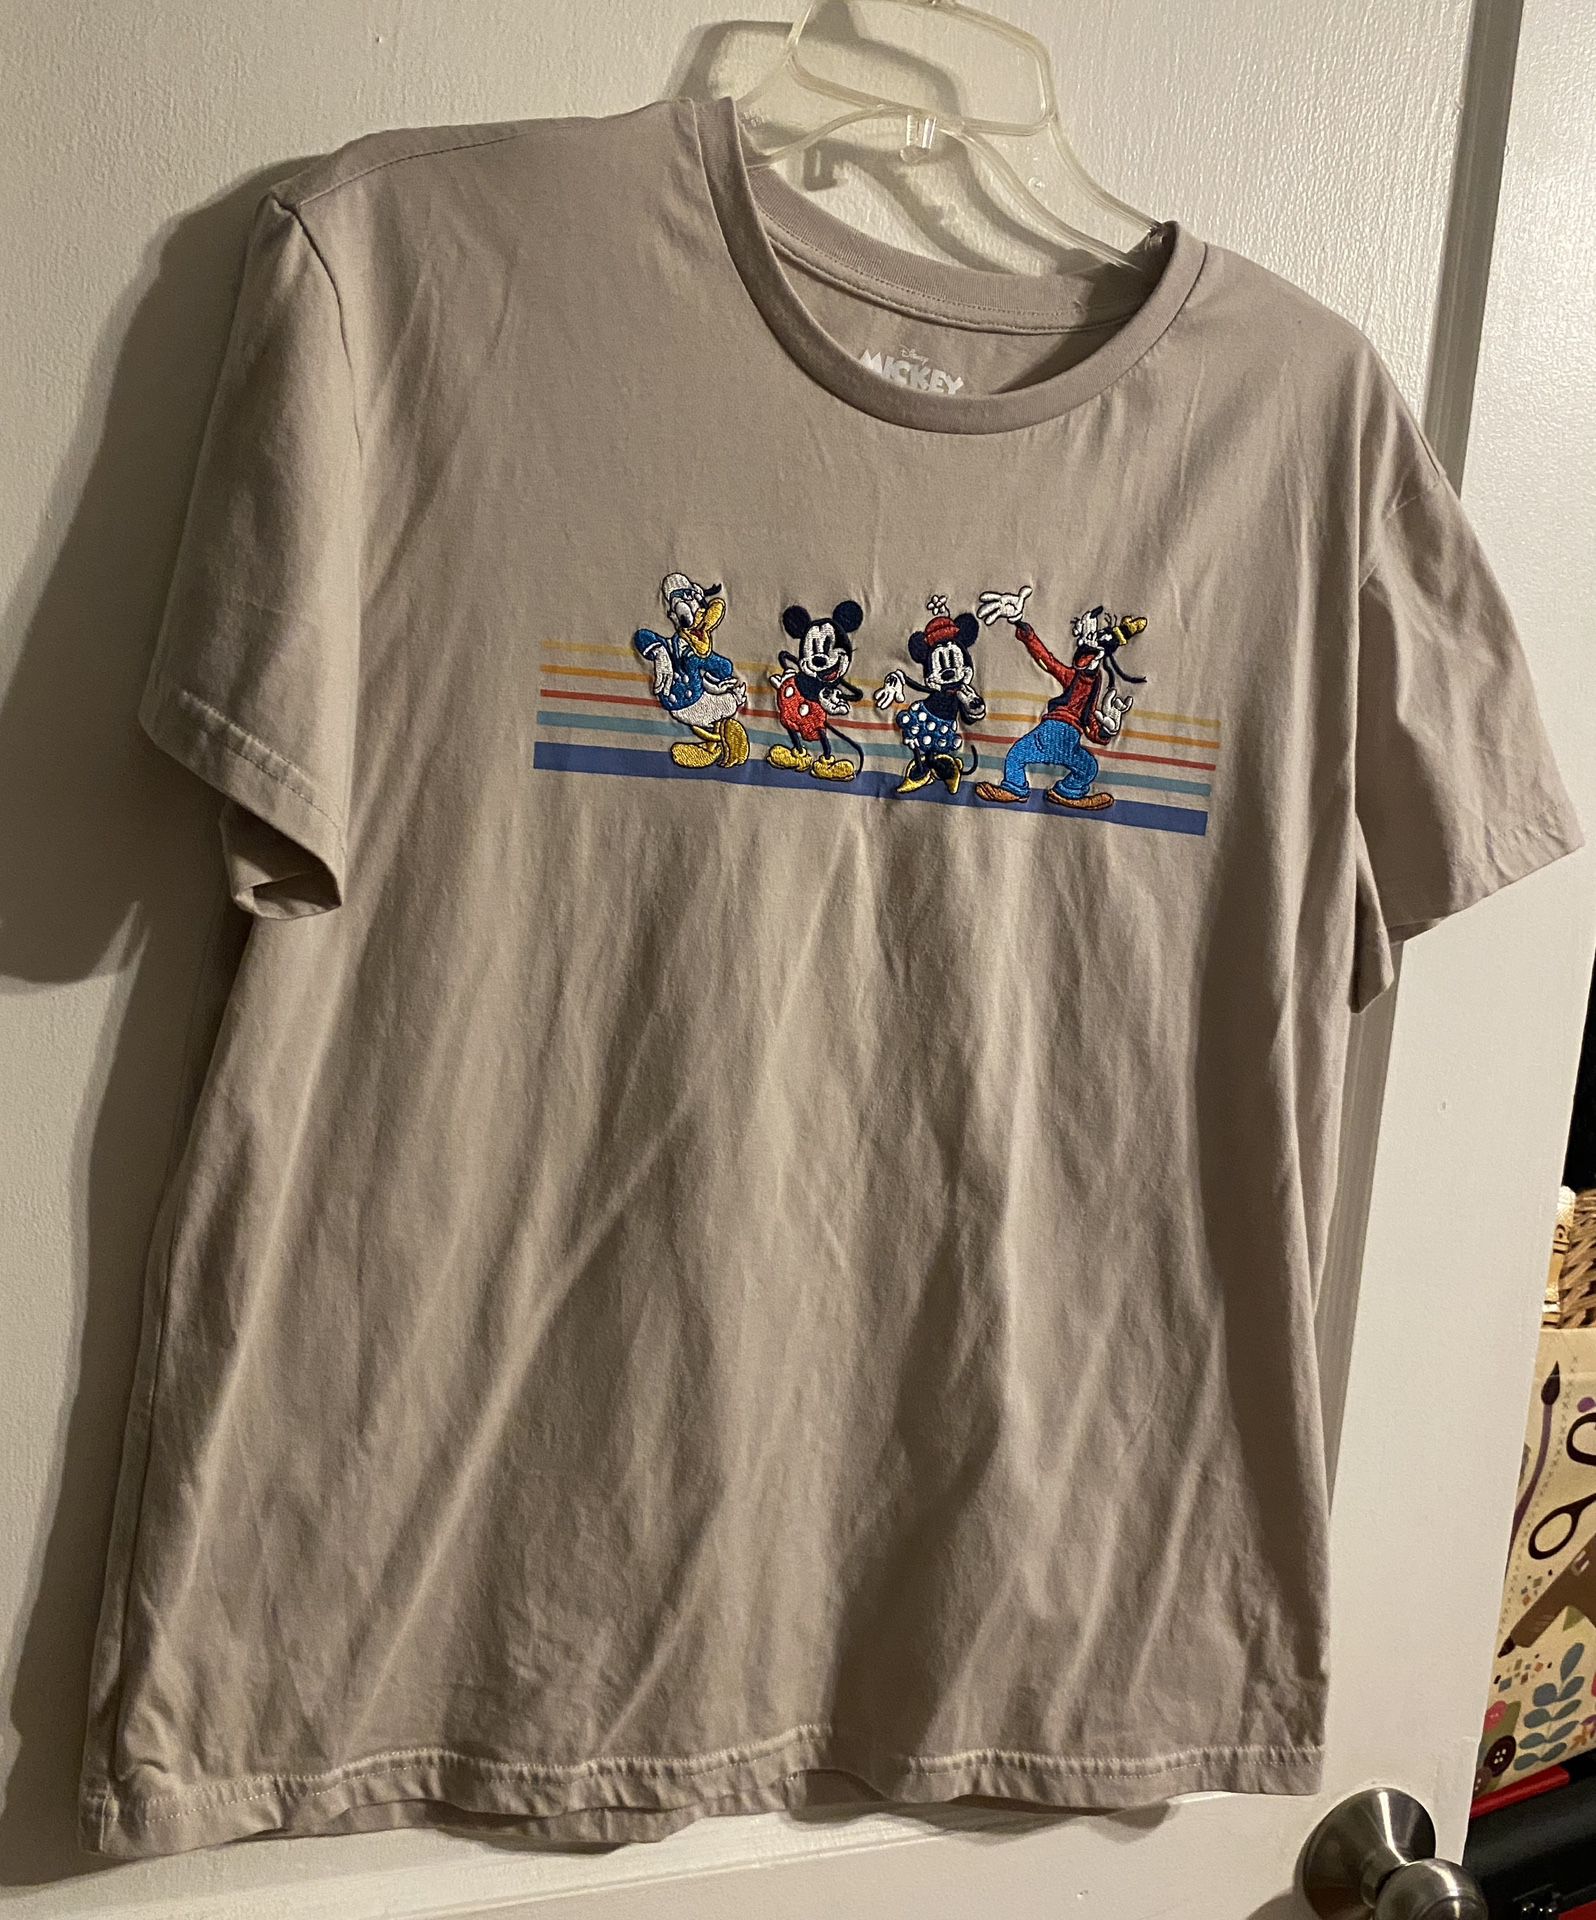 New no tags Embroidered Disney Tee size large never used 